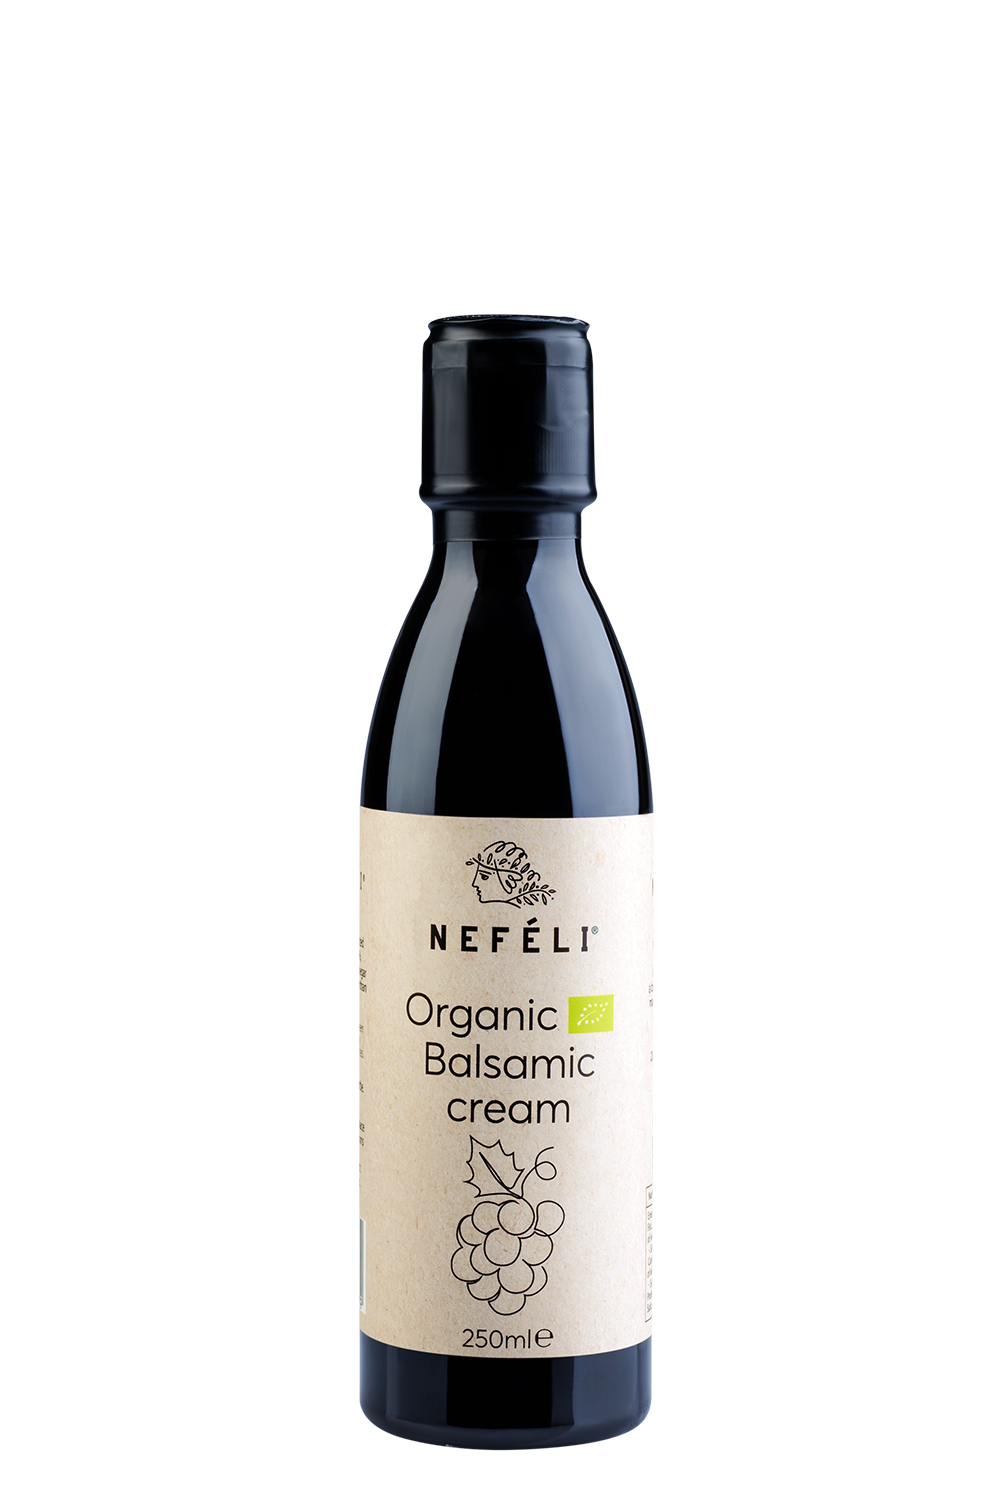 Organic Balsamic cream in squeezable bottle